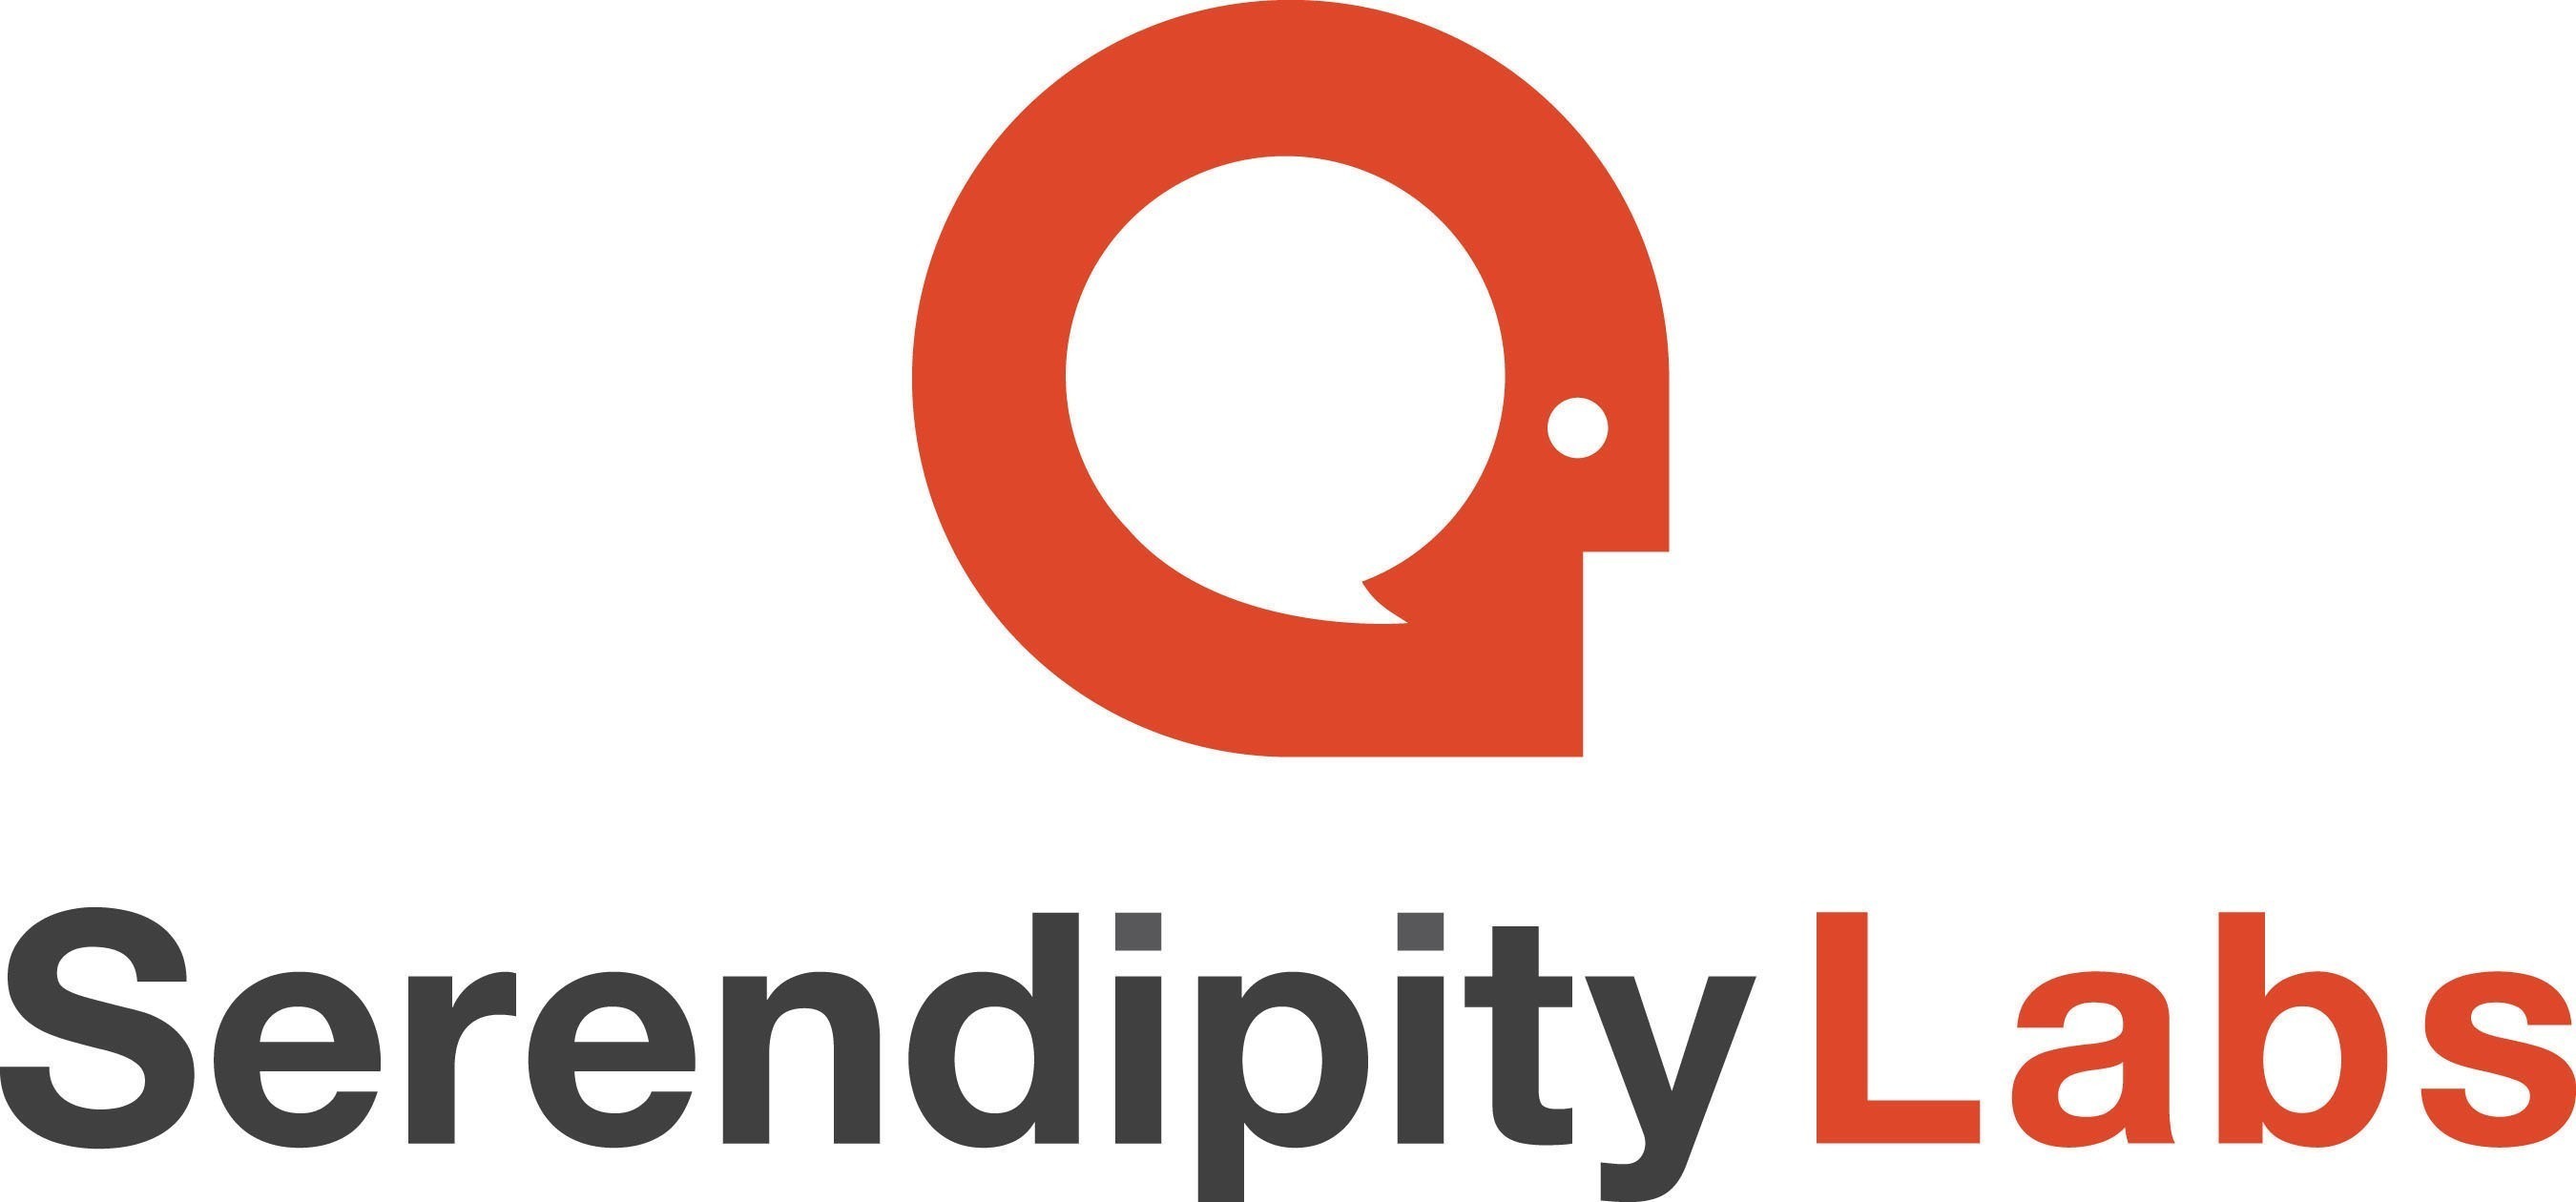 Serendipity Labs is a national network of members-only workplaces offering private offices, coworking memberships and meeting space to mobile professionals, independent workers and project teams.